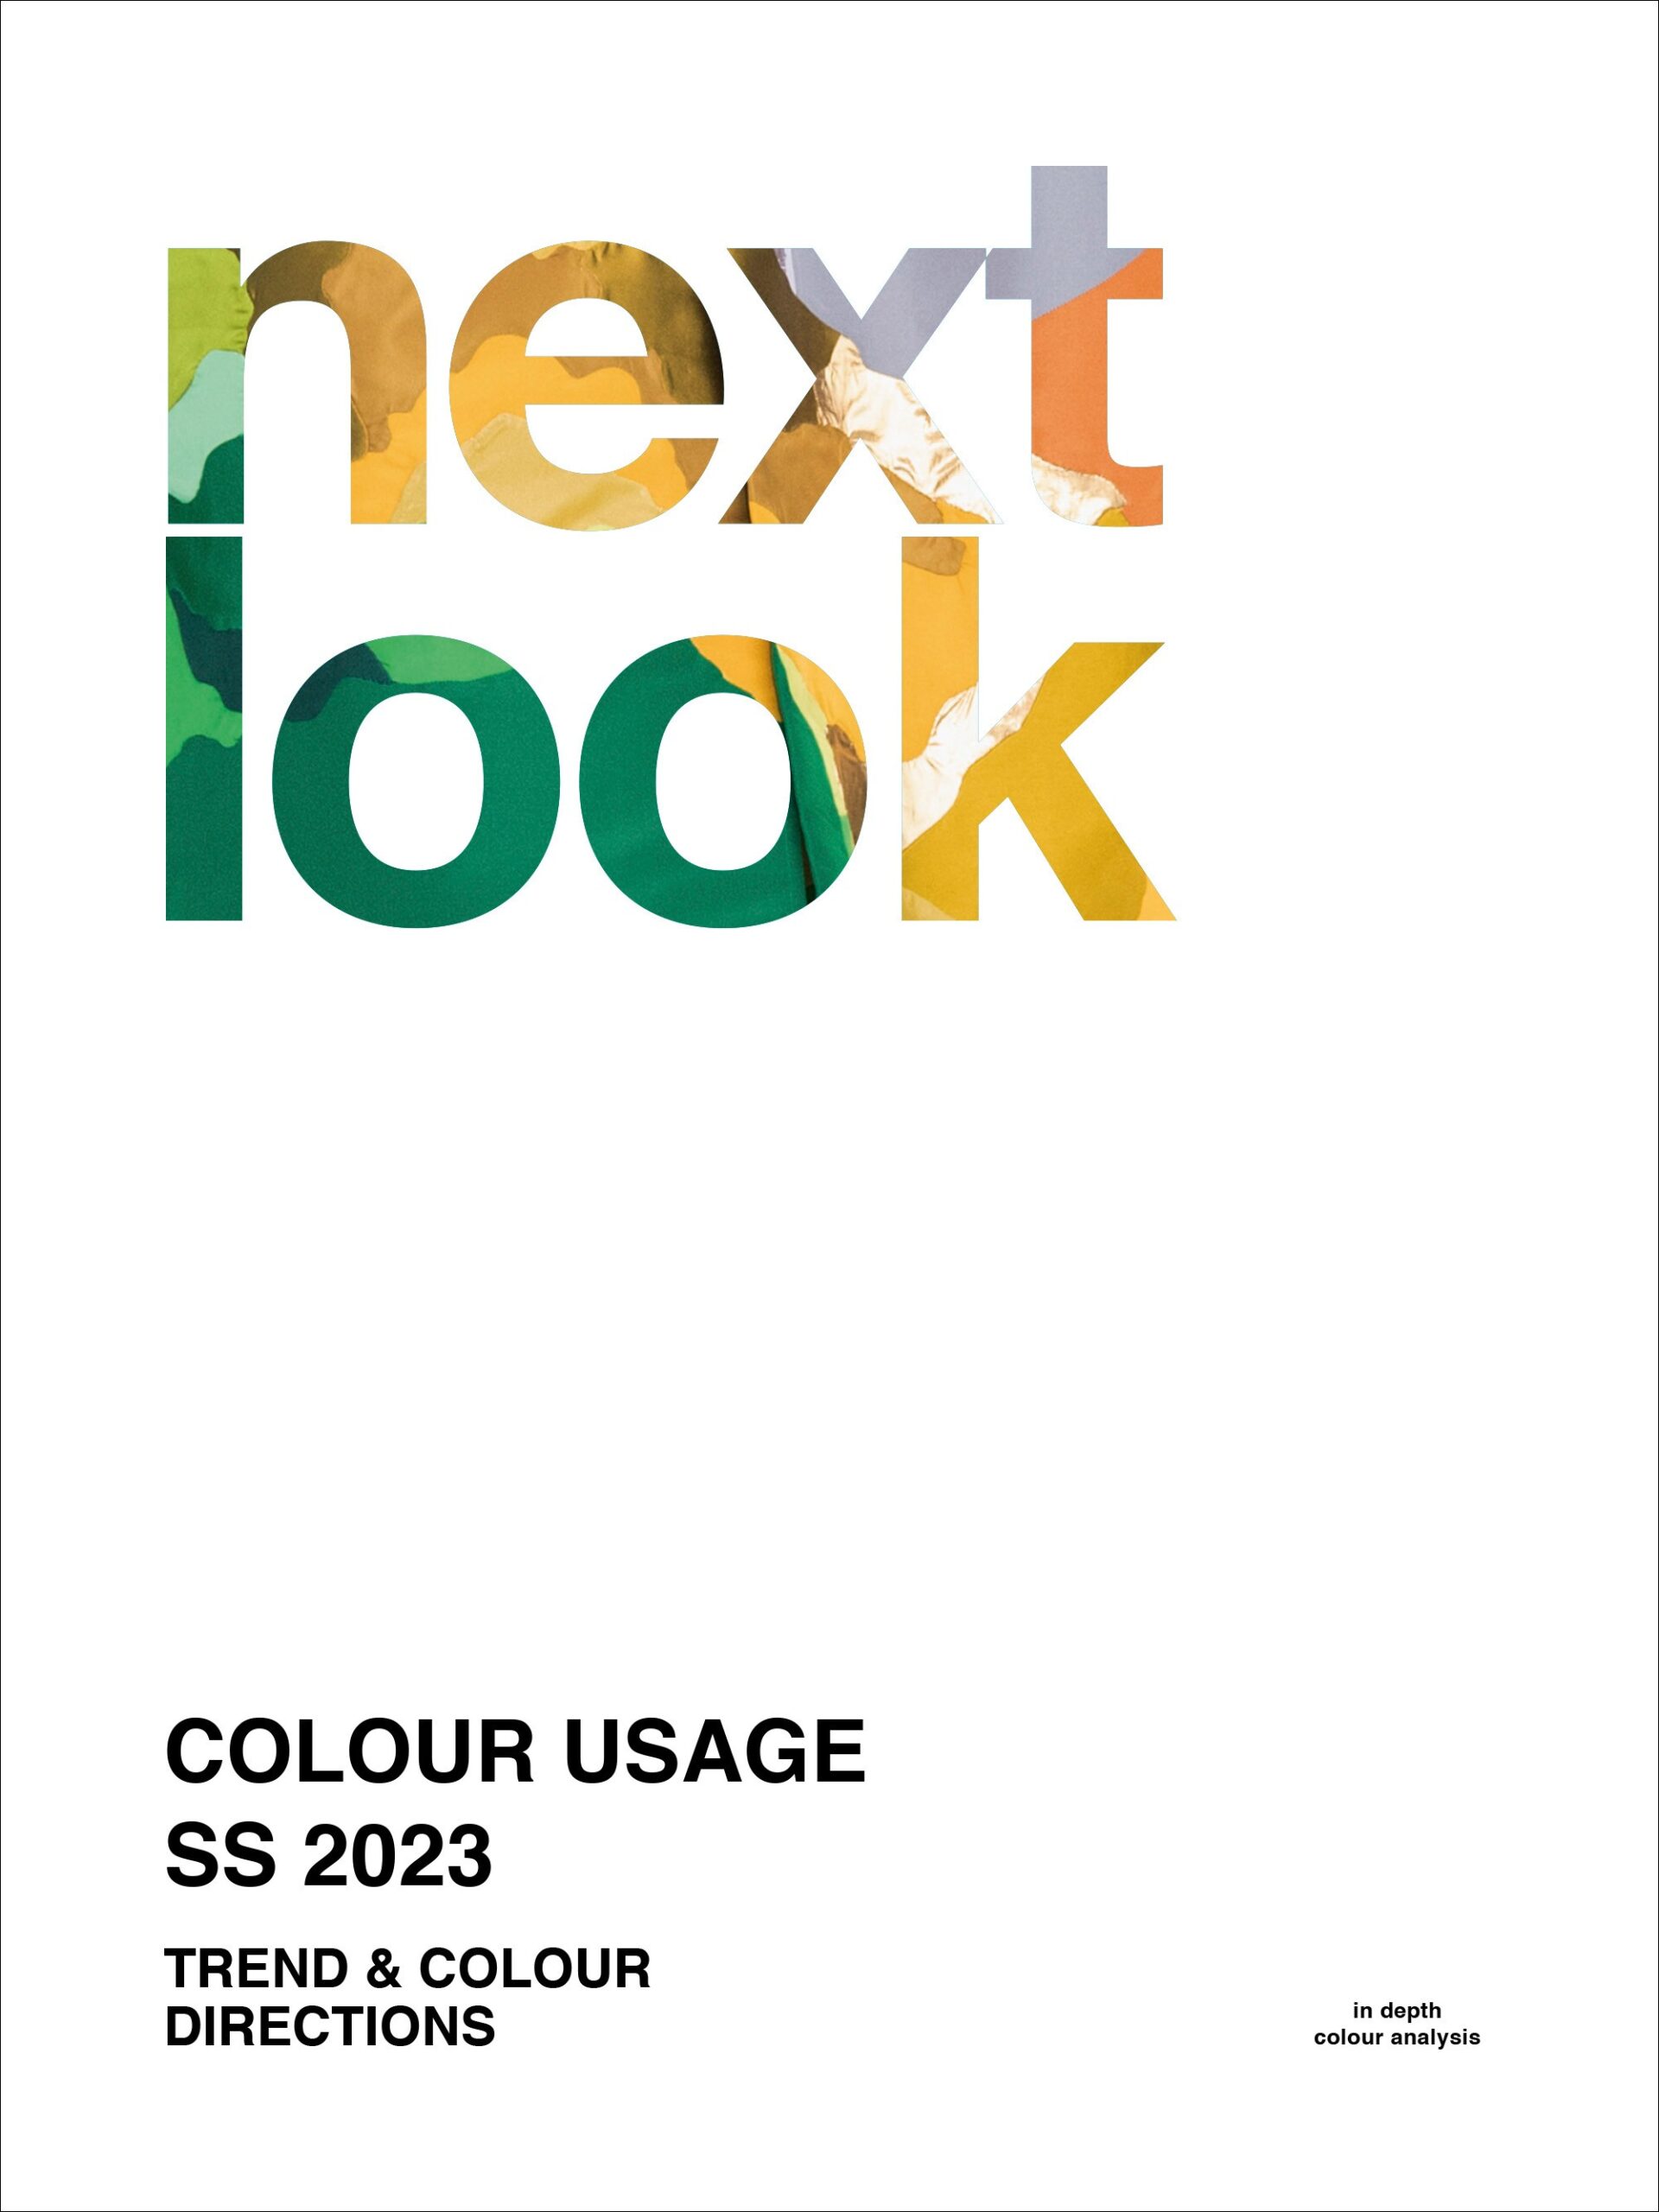 Next Look Color Usage S/S & A/W